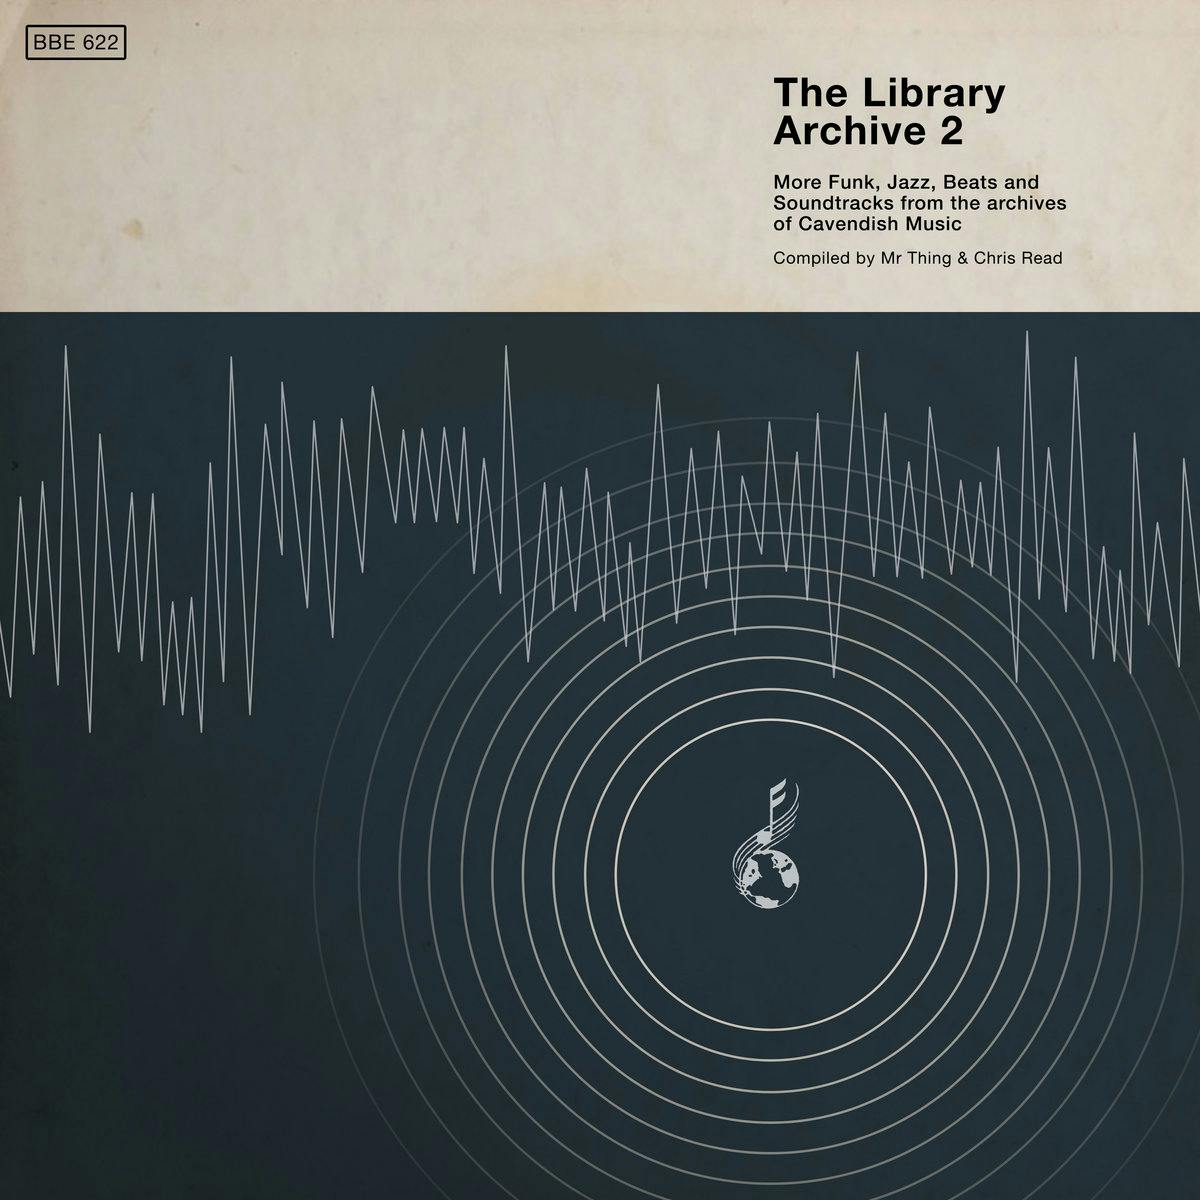 Crate digging DJs Mr Thing and Chris Read return to BBE Music with a second volume of their compilation series ‘The Library Archive’, presenting more Funk, Jazz, Beats and Soundtracks from the archives of Cavendish Music.